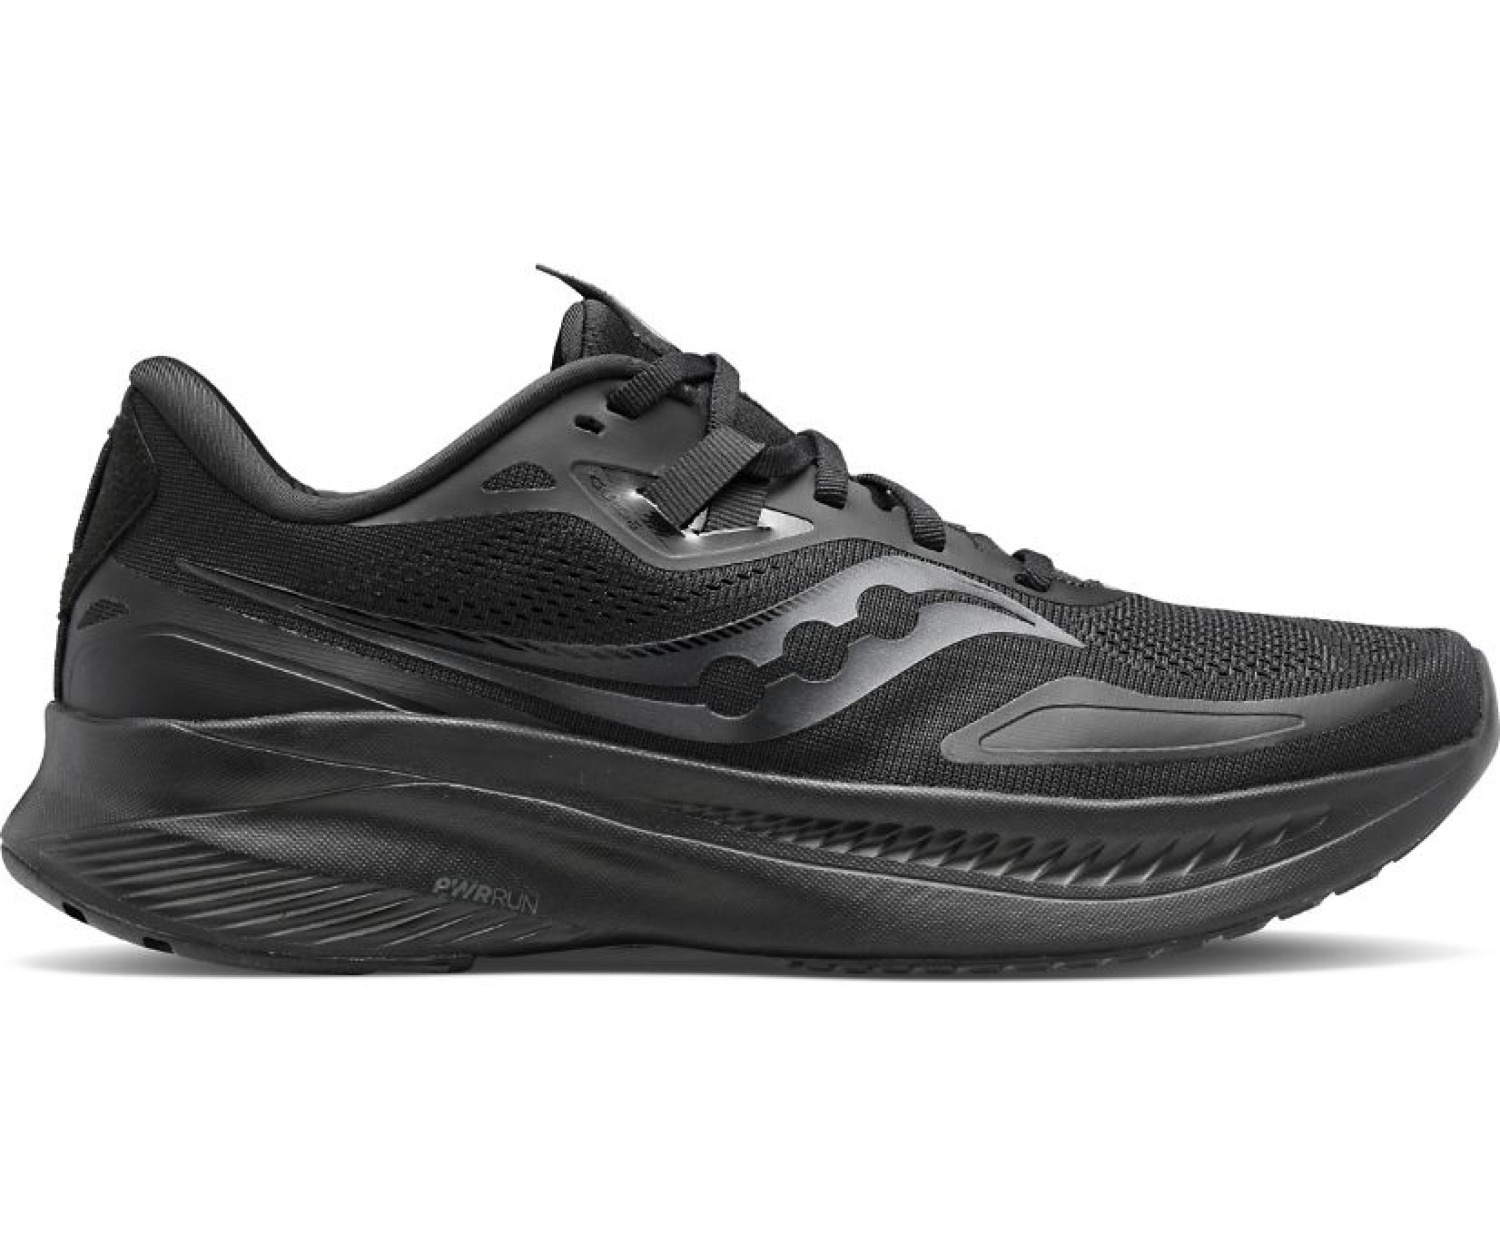 Saucony Men & Women Running Shoes: Banner Guide $75, Kinvara 13 Wide $75 and More + Free Shipping